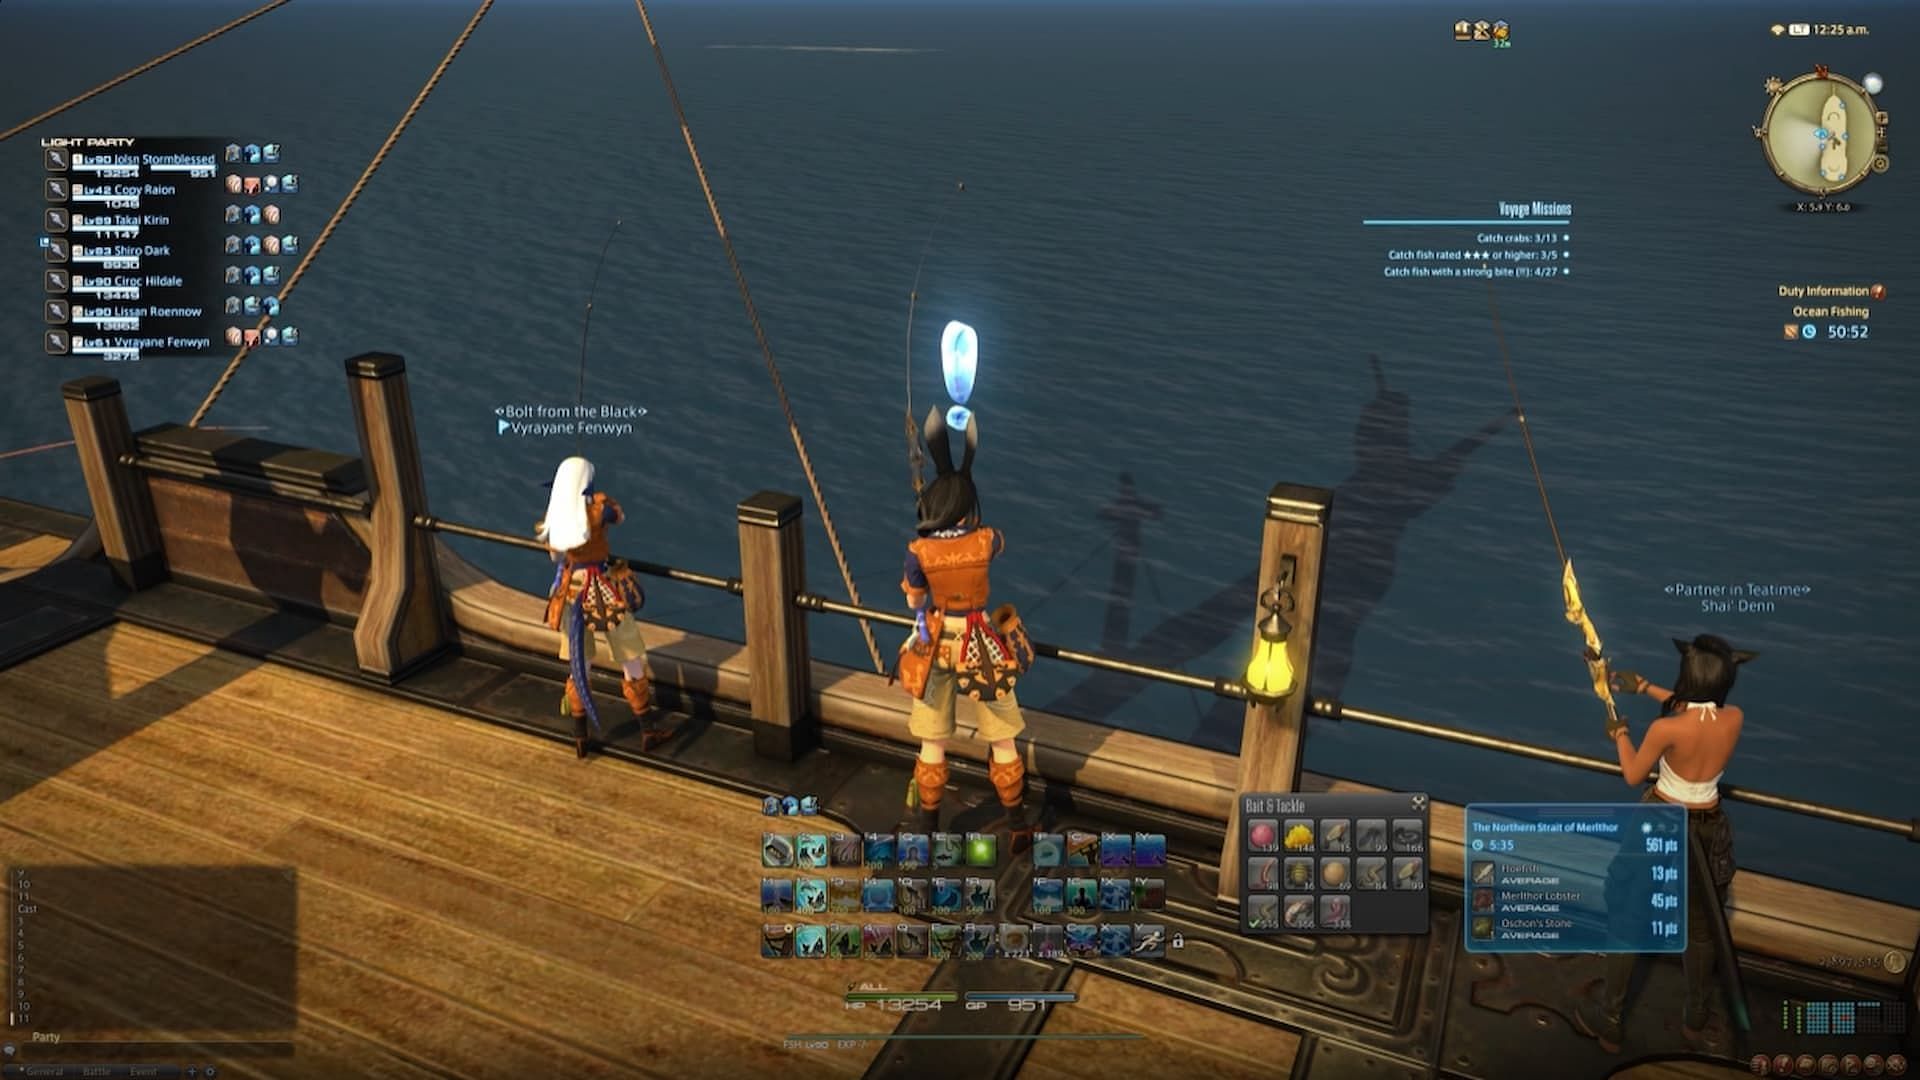 Ocean Fishing in Final Fantasy 14 (Image via Square Enix and Jolsn/YouTube)